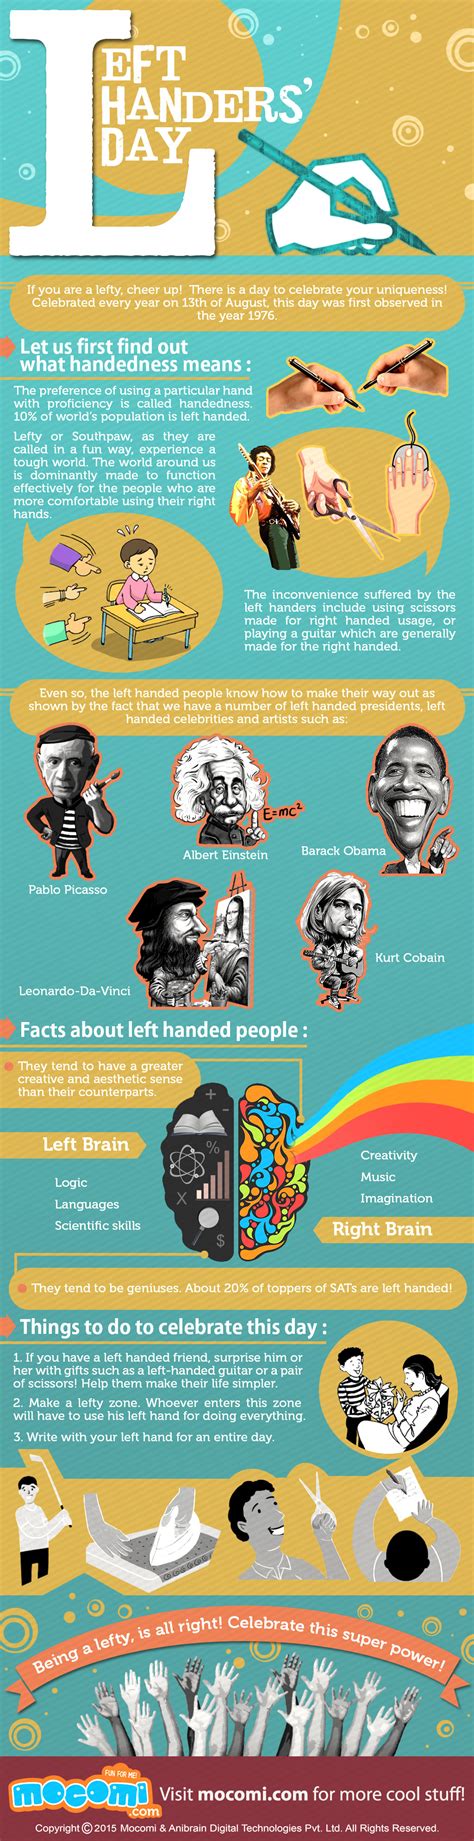 International Left Handers Day Celebrated Every Year On 13th Of August